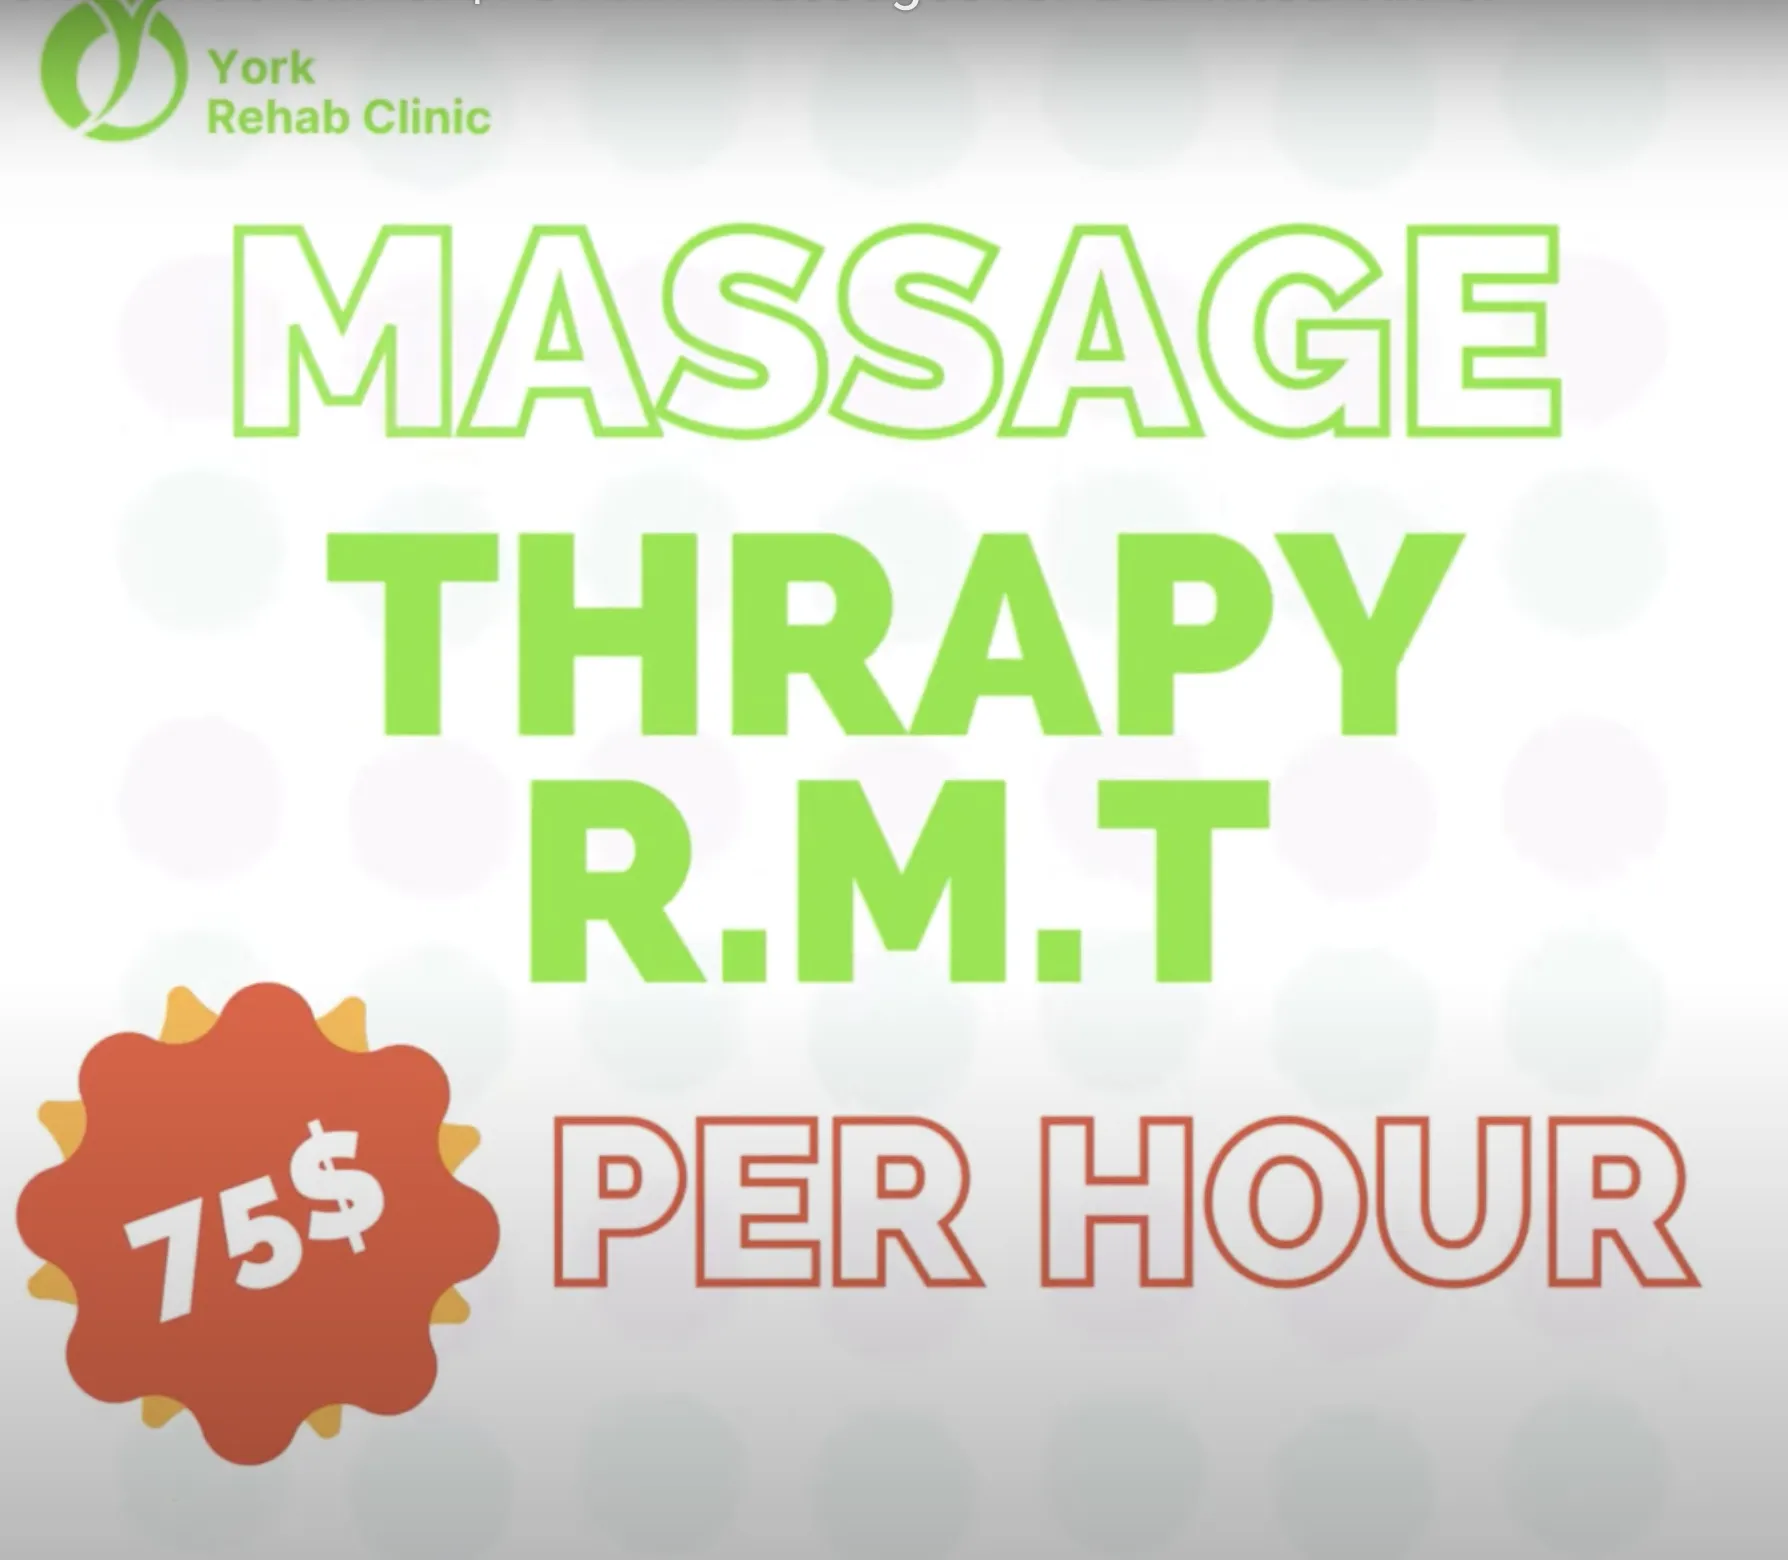 Relax and Save at York Rehab Clinic: $75 RMT Massages for a Limited Time!